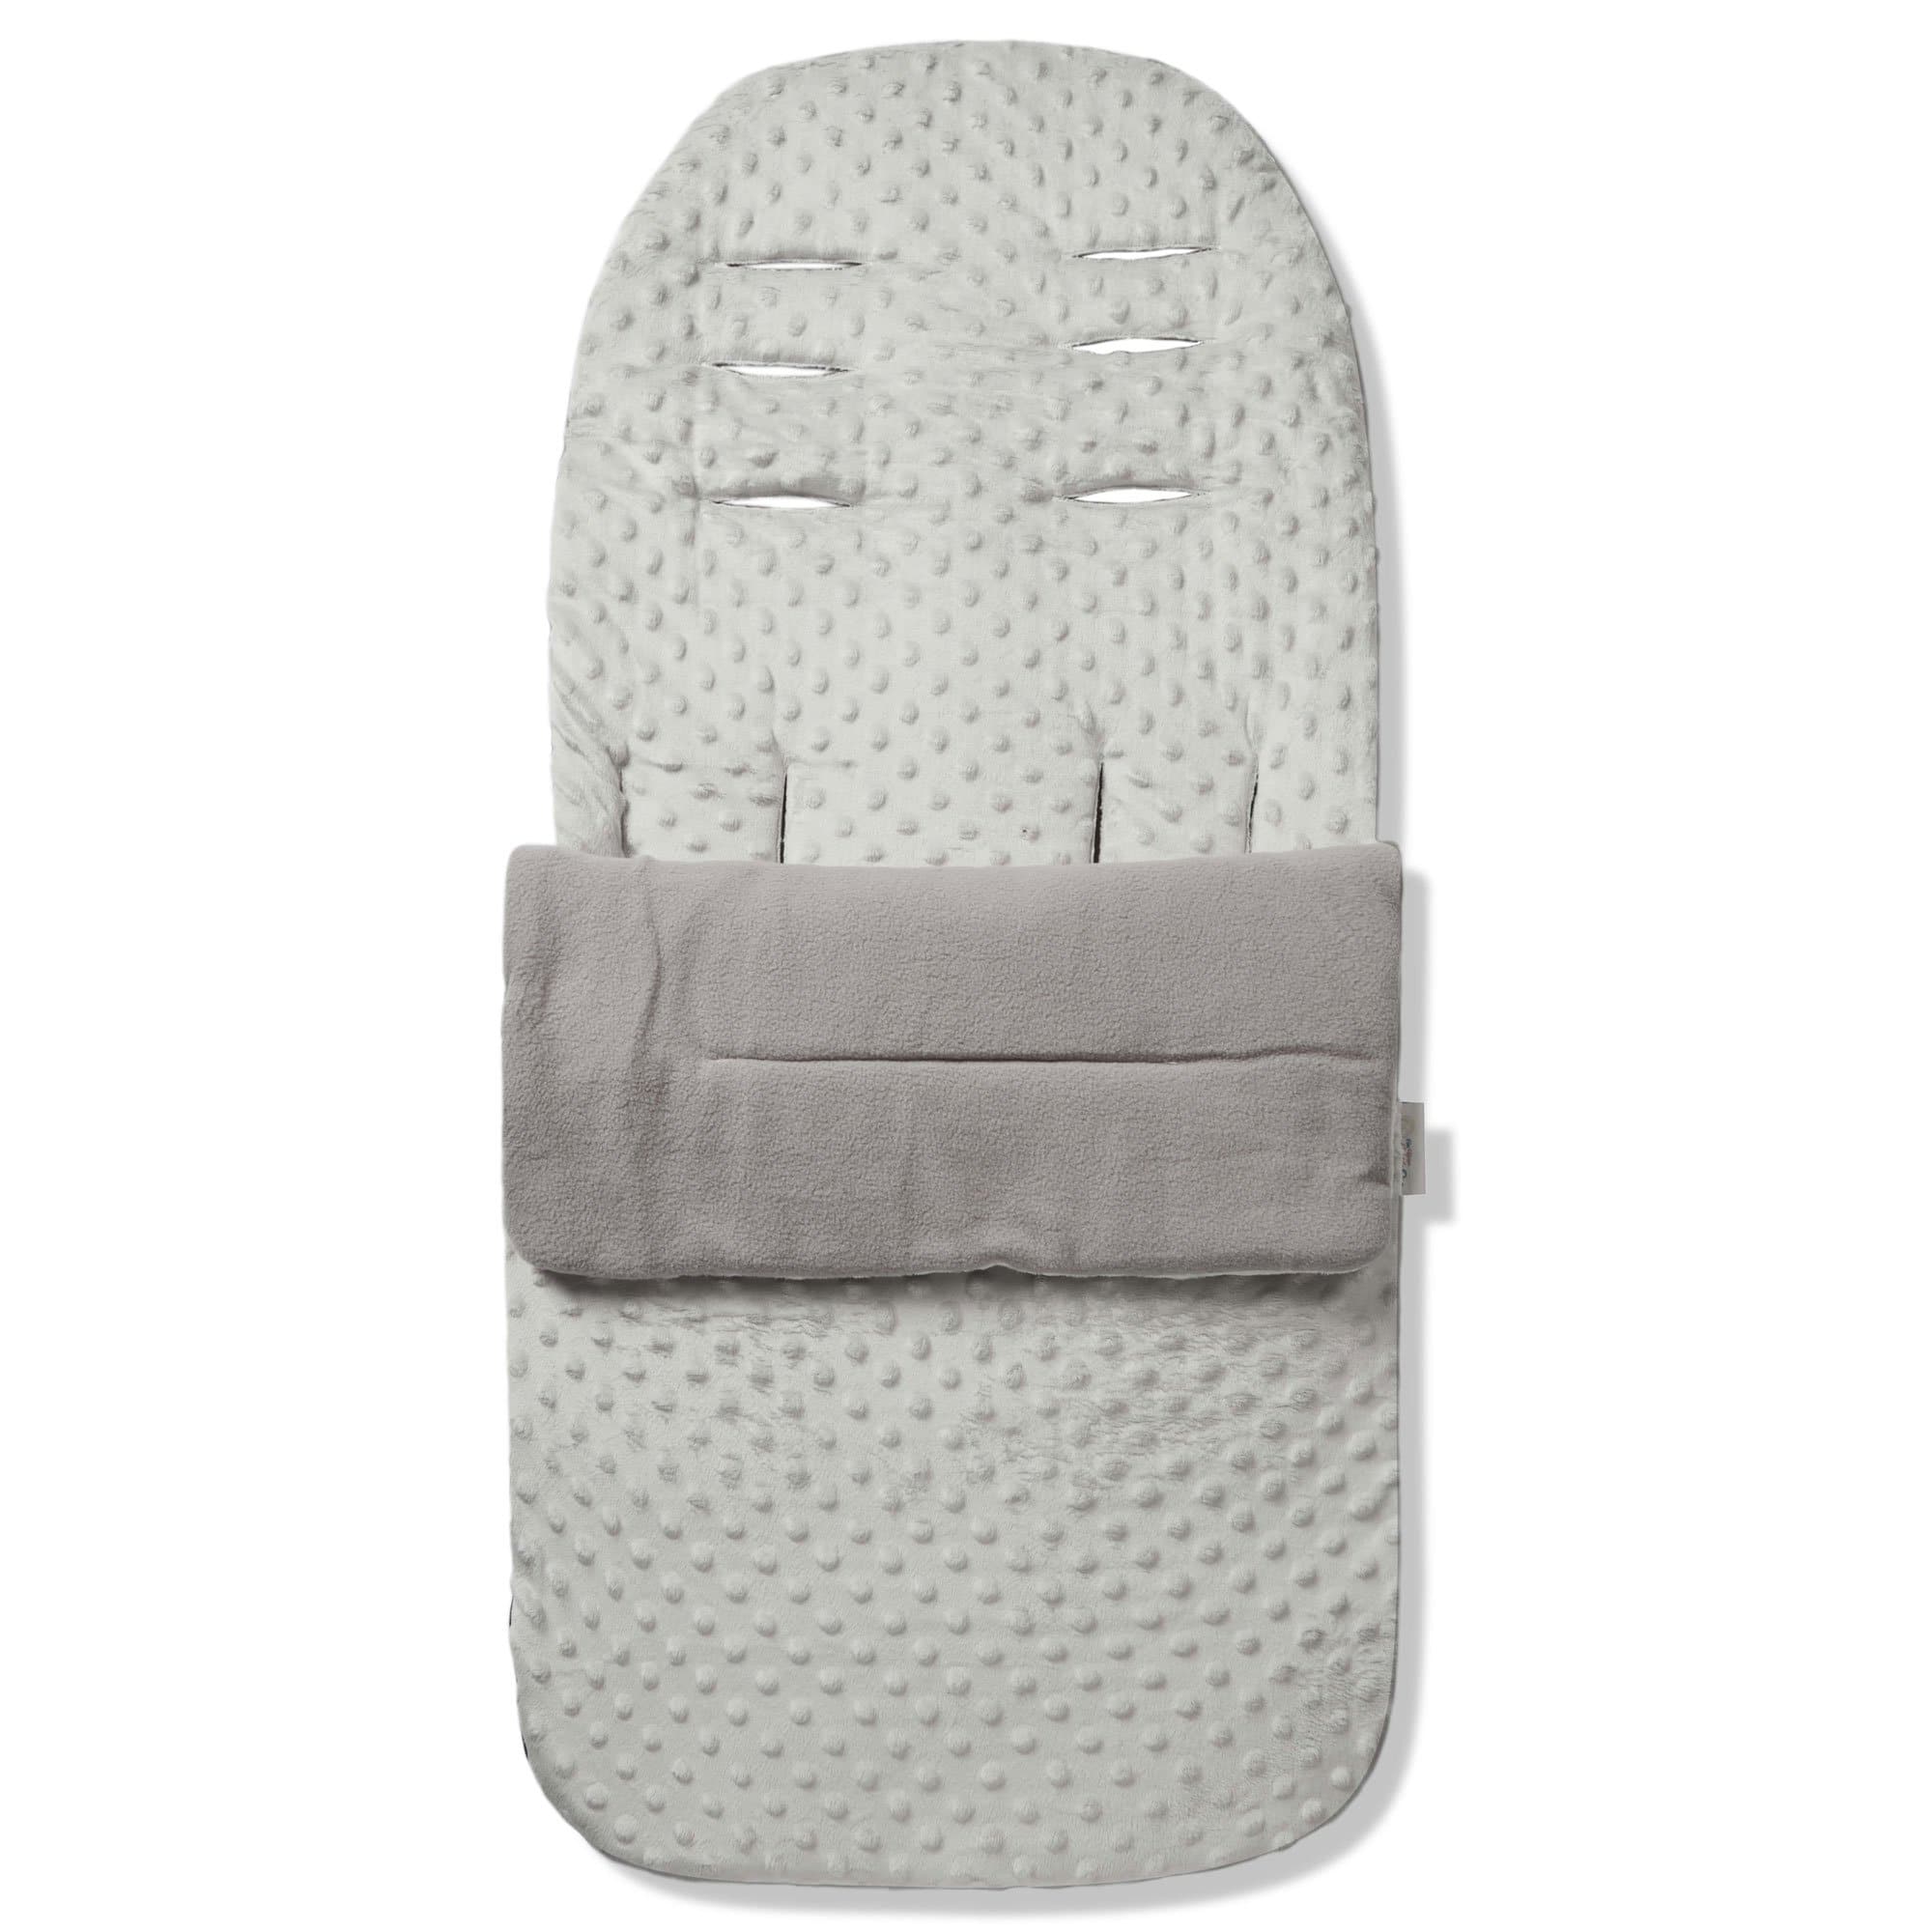 Dimple Footmuff / Cosy Toes Compatible with My Babiie - Grey / Fits All Models | For Your Little One